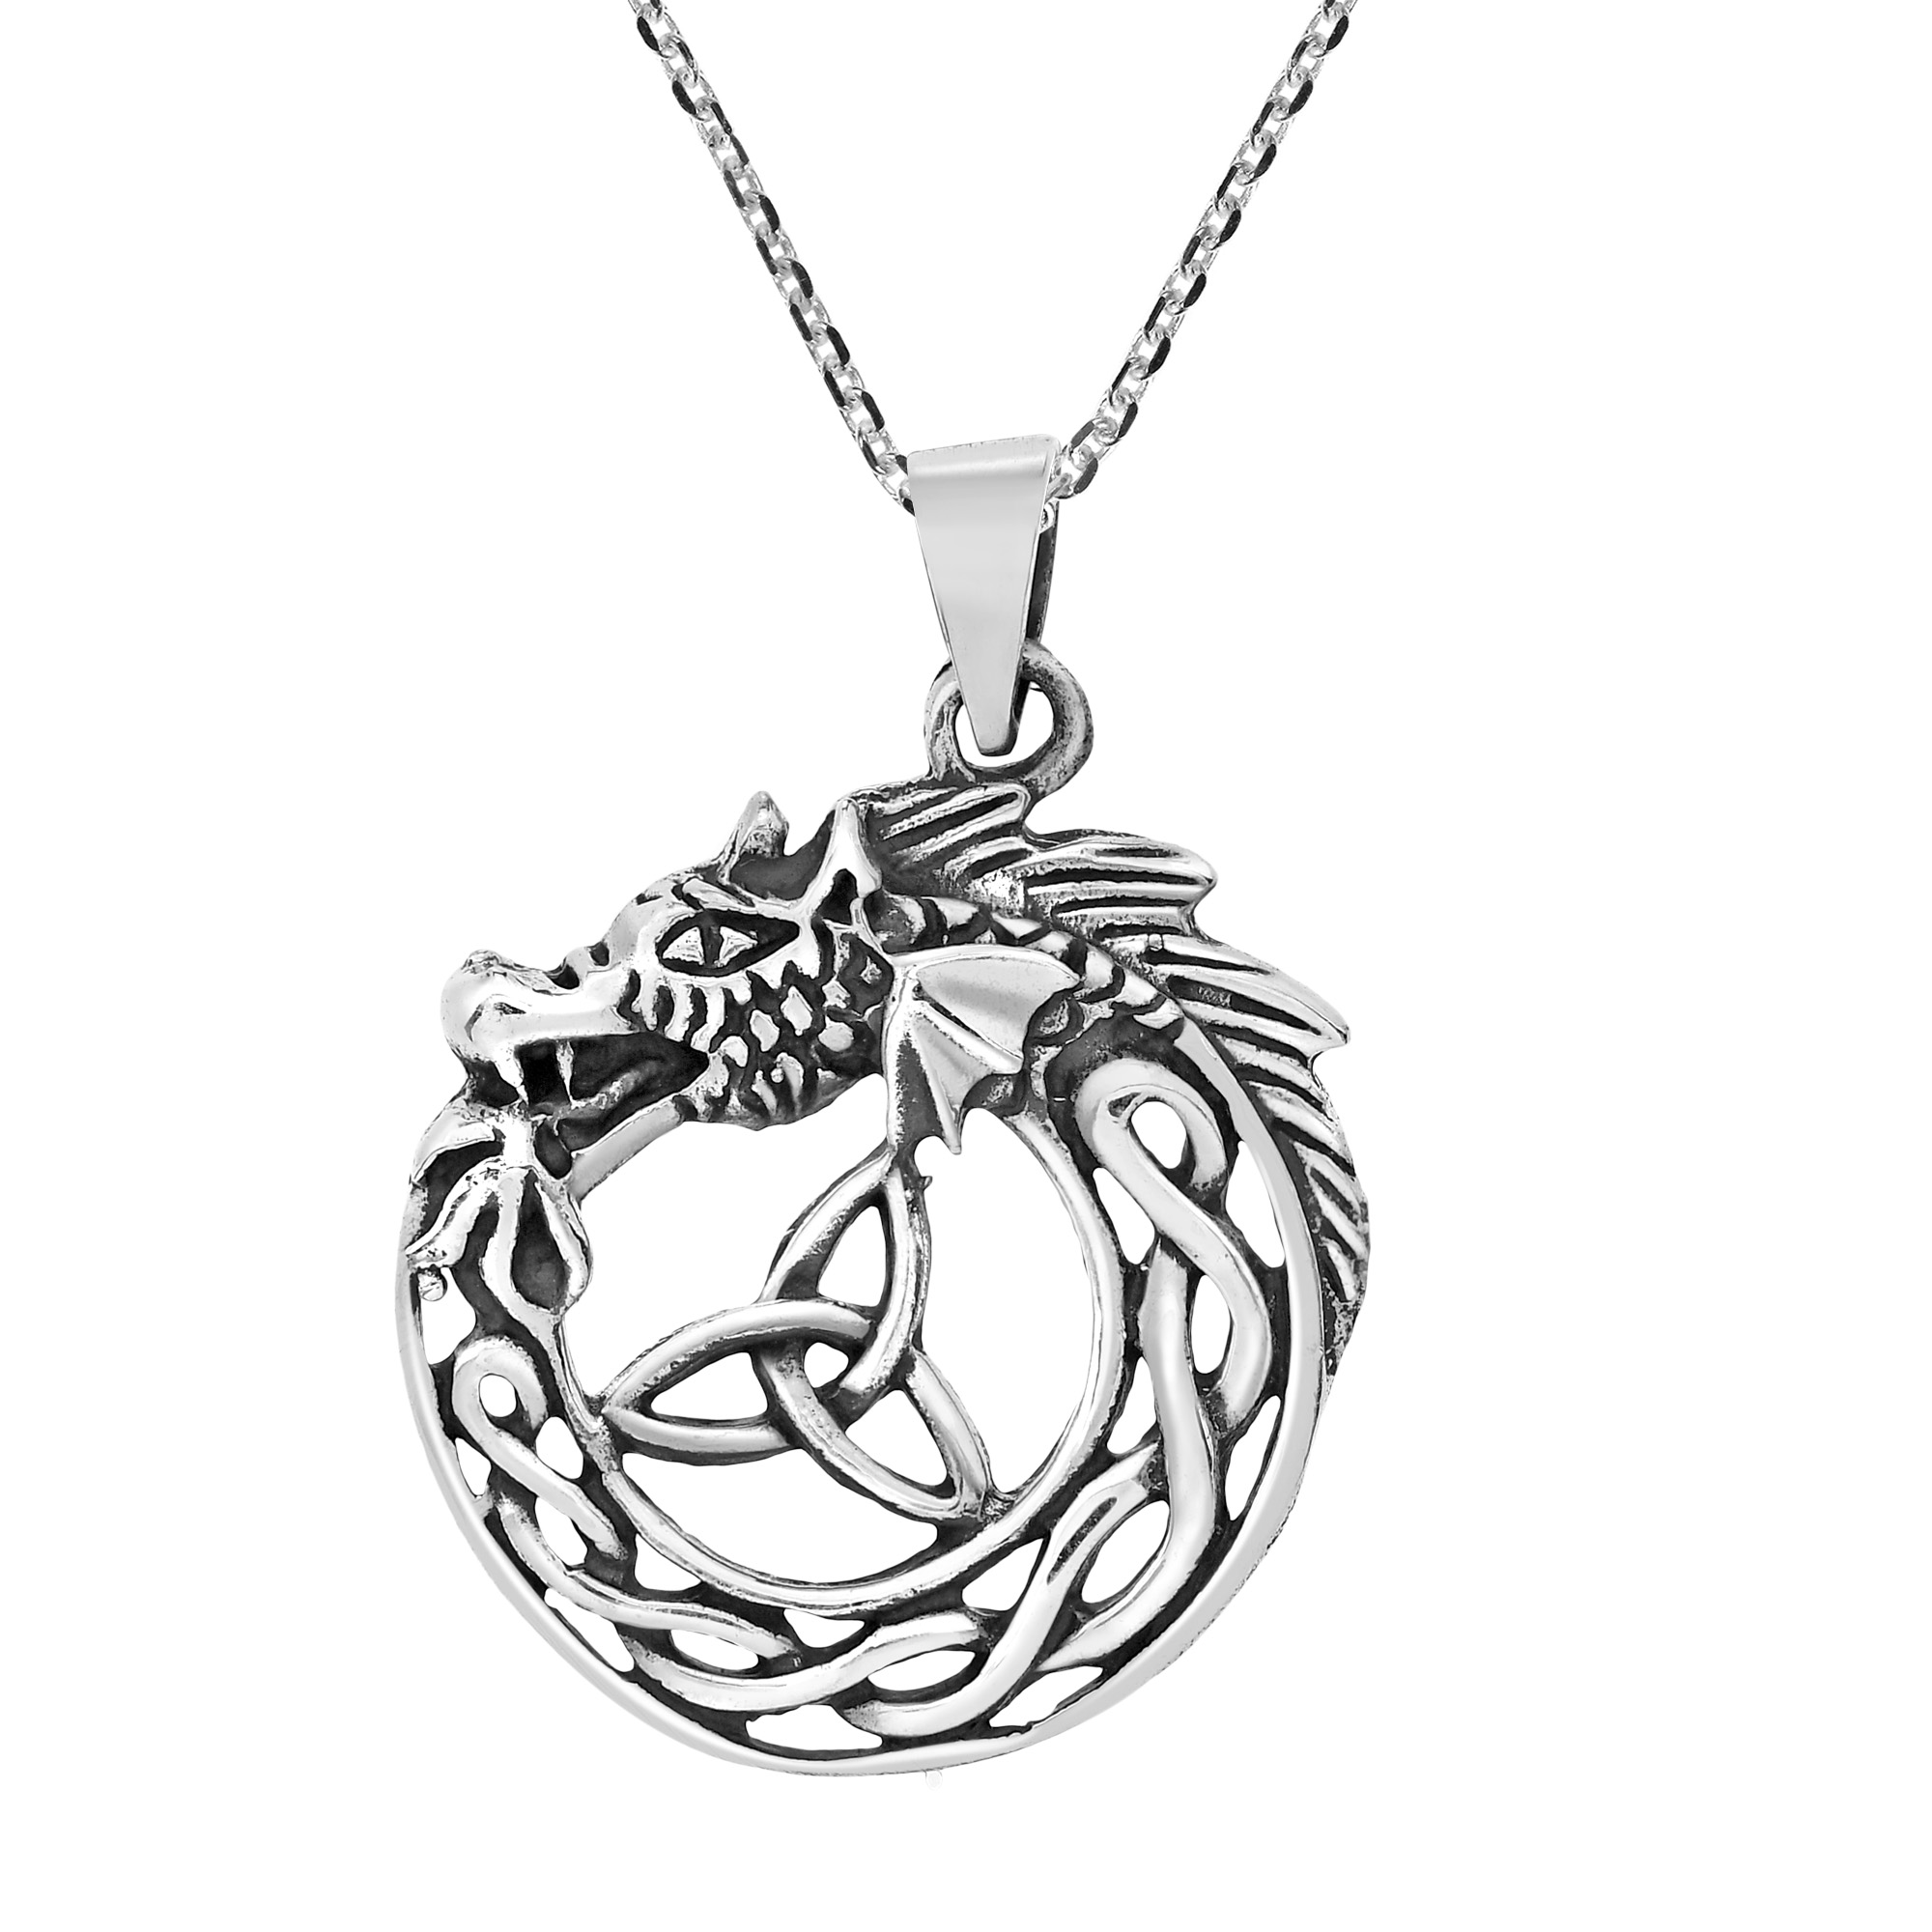 Mystic Ouroboros and Celtic Knot Sterling Silver Pendant Necklace